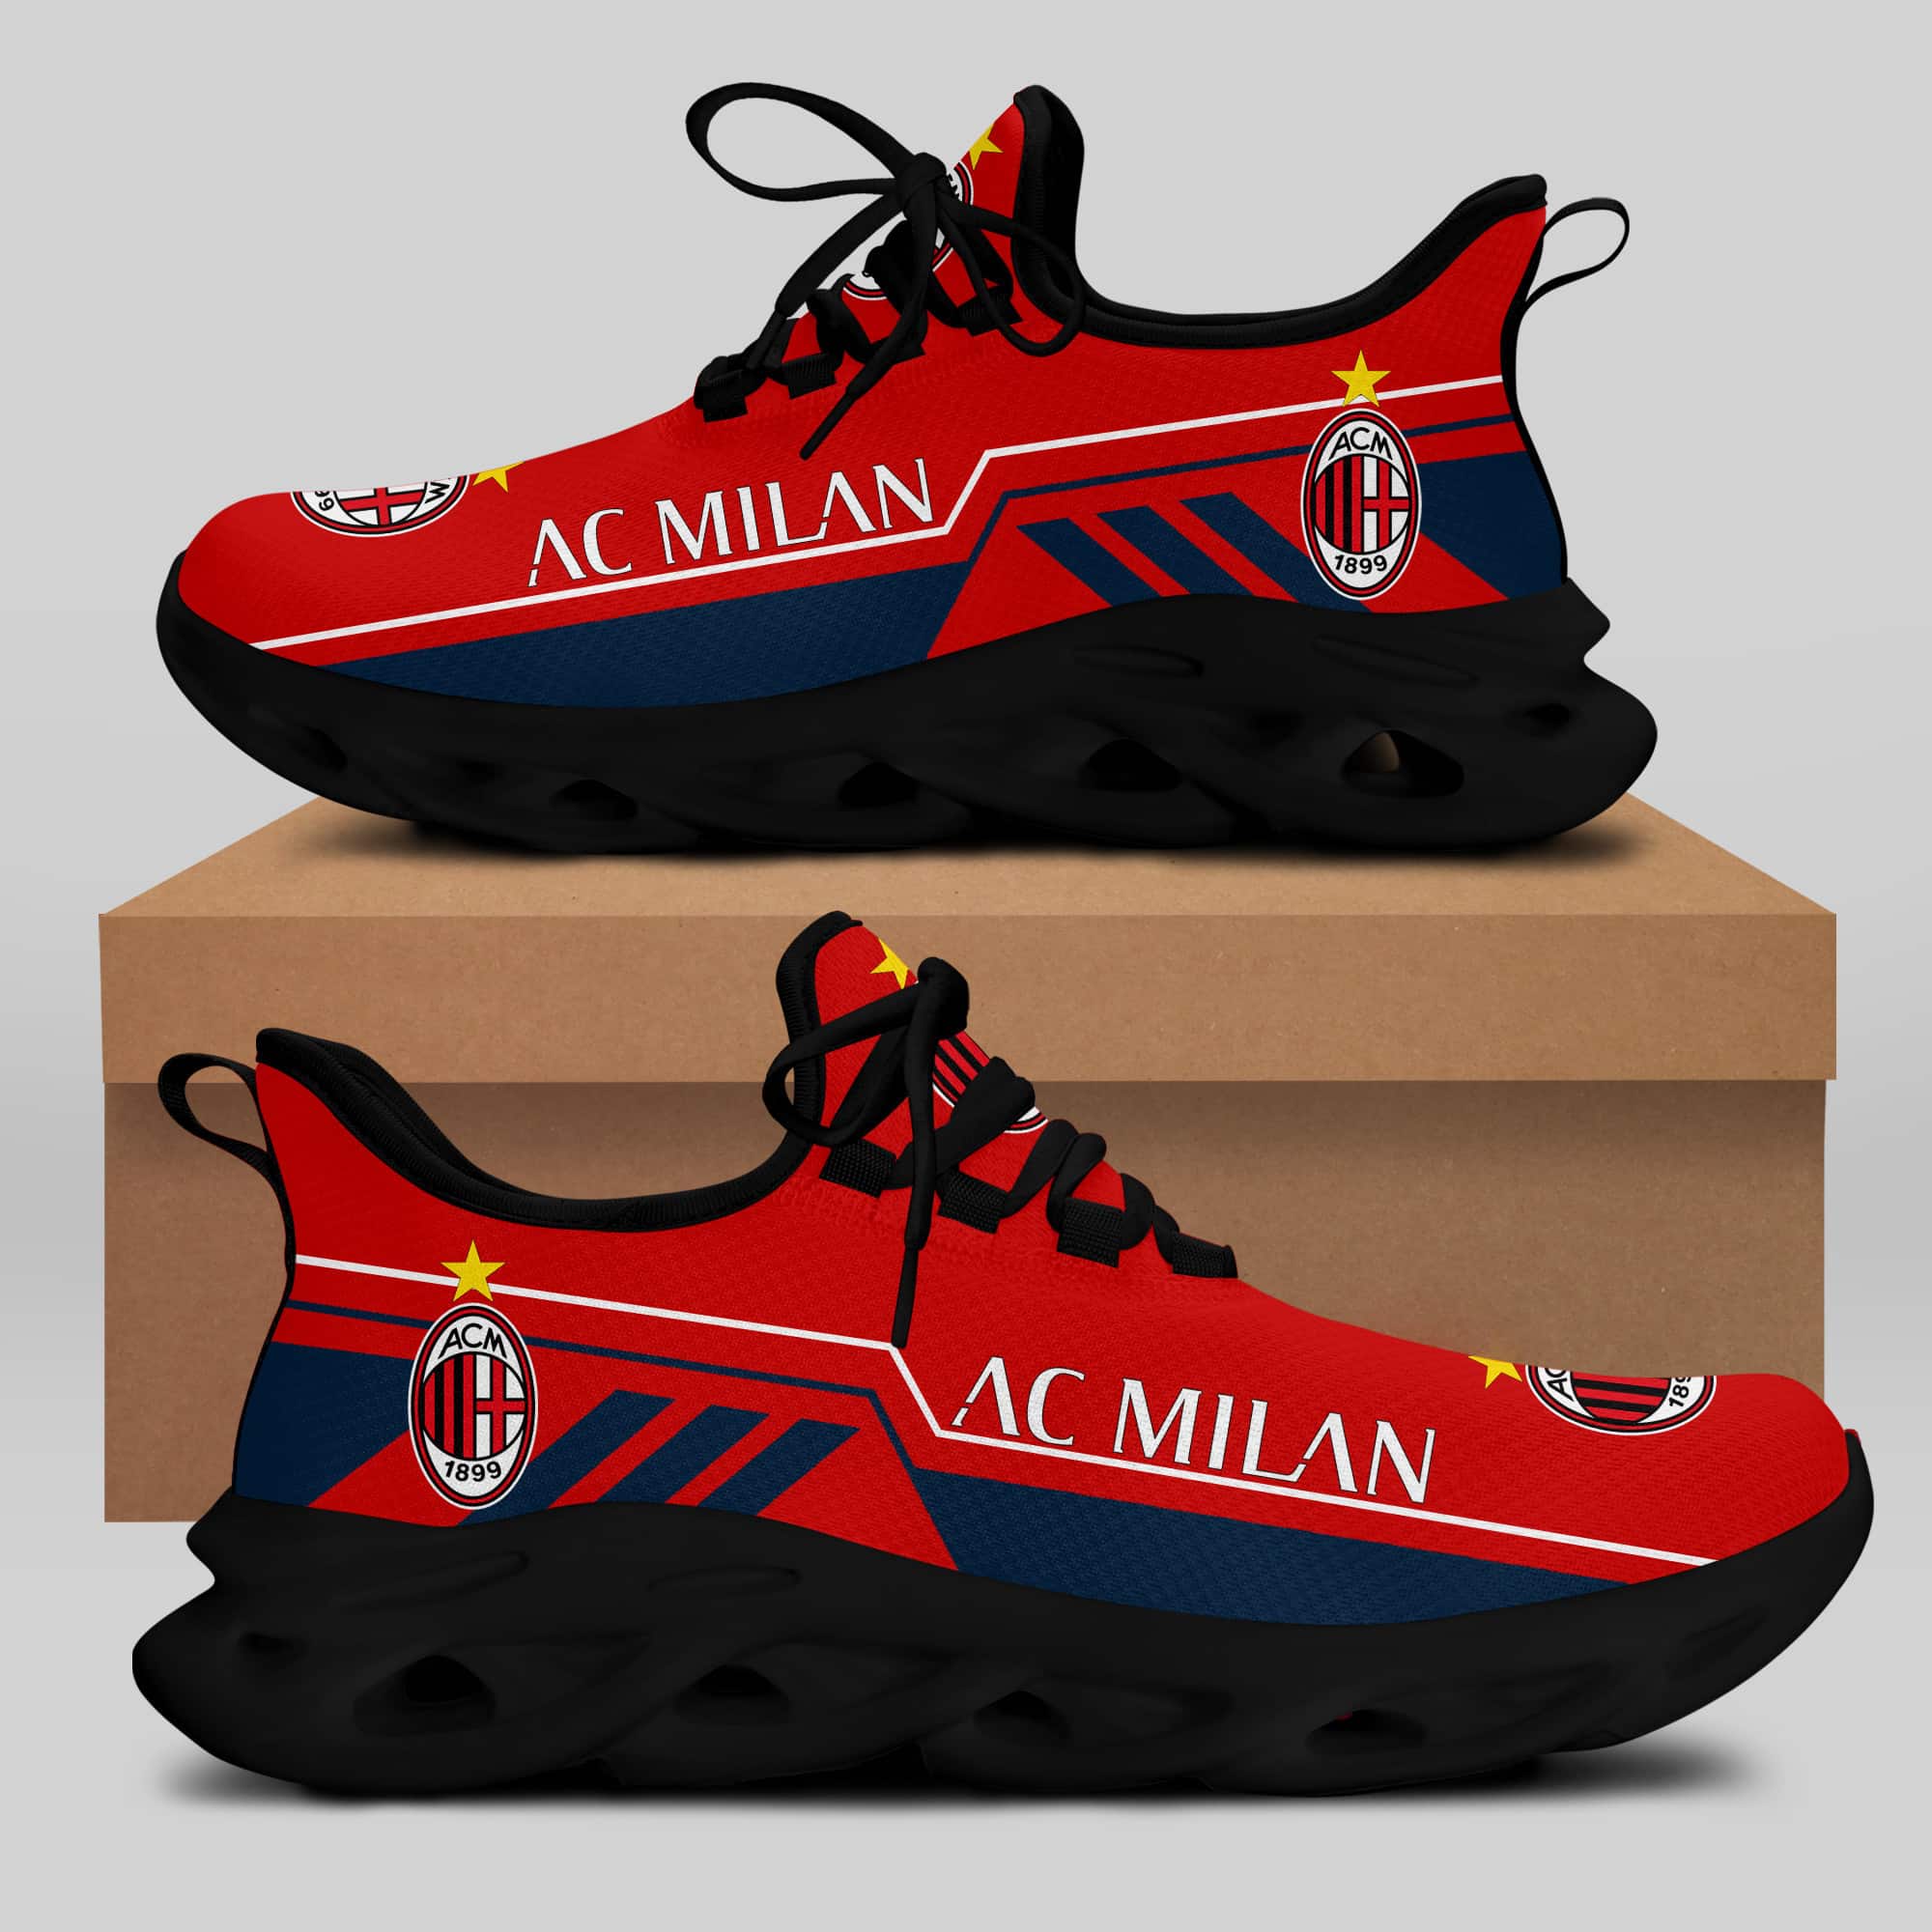 Ac Milan Running Shoes Max Soul Shoes Sneakers Ver 15 1